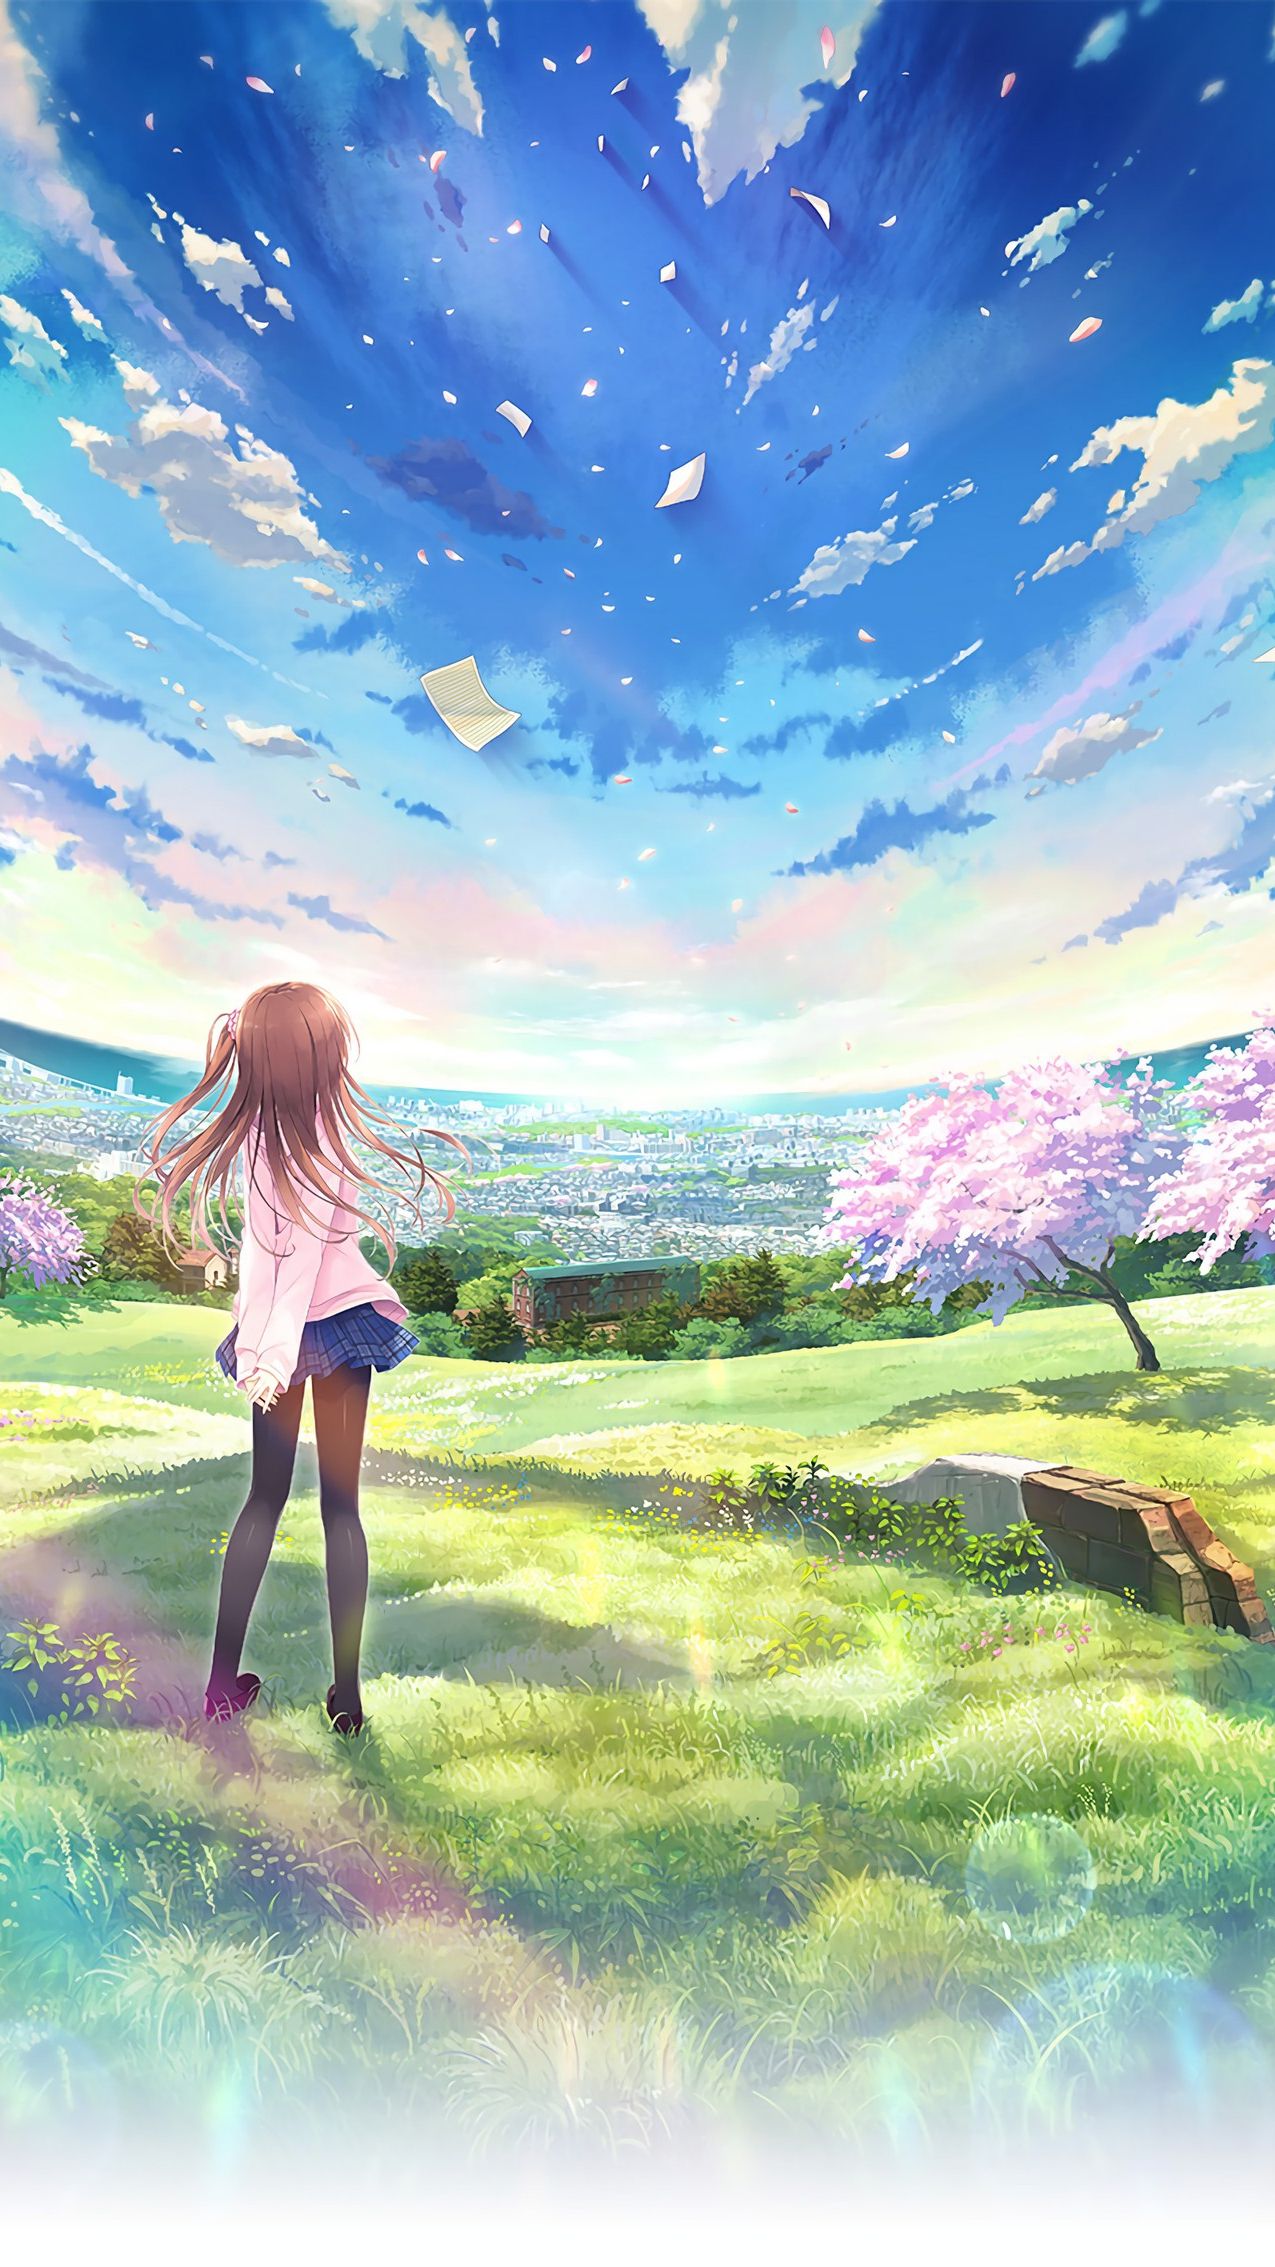 anime world wallpaper, sky, people in nature, nature, natural landscape, watercolor paint, beauty, summer, grass, grassland, fun